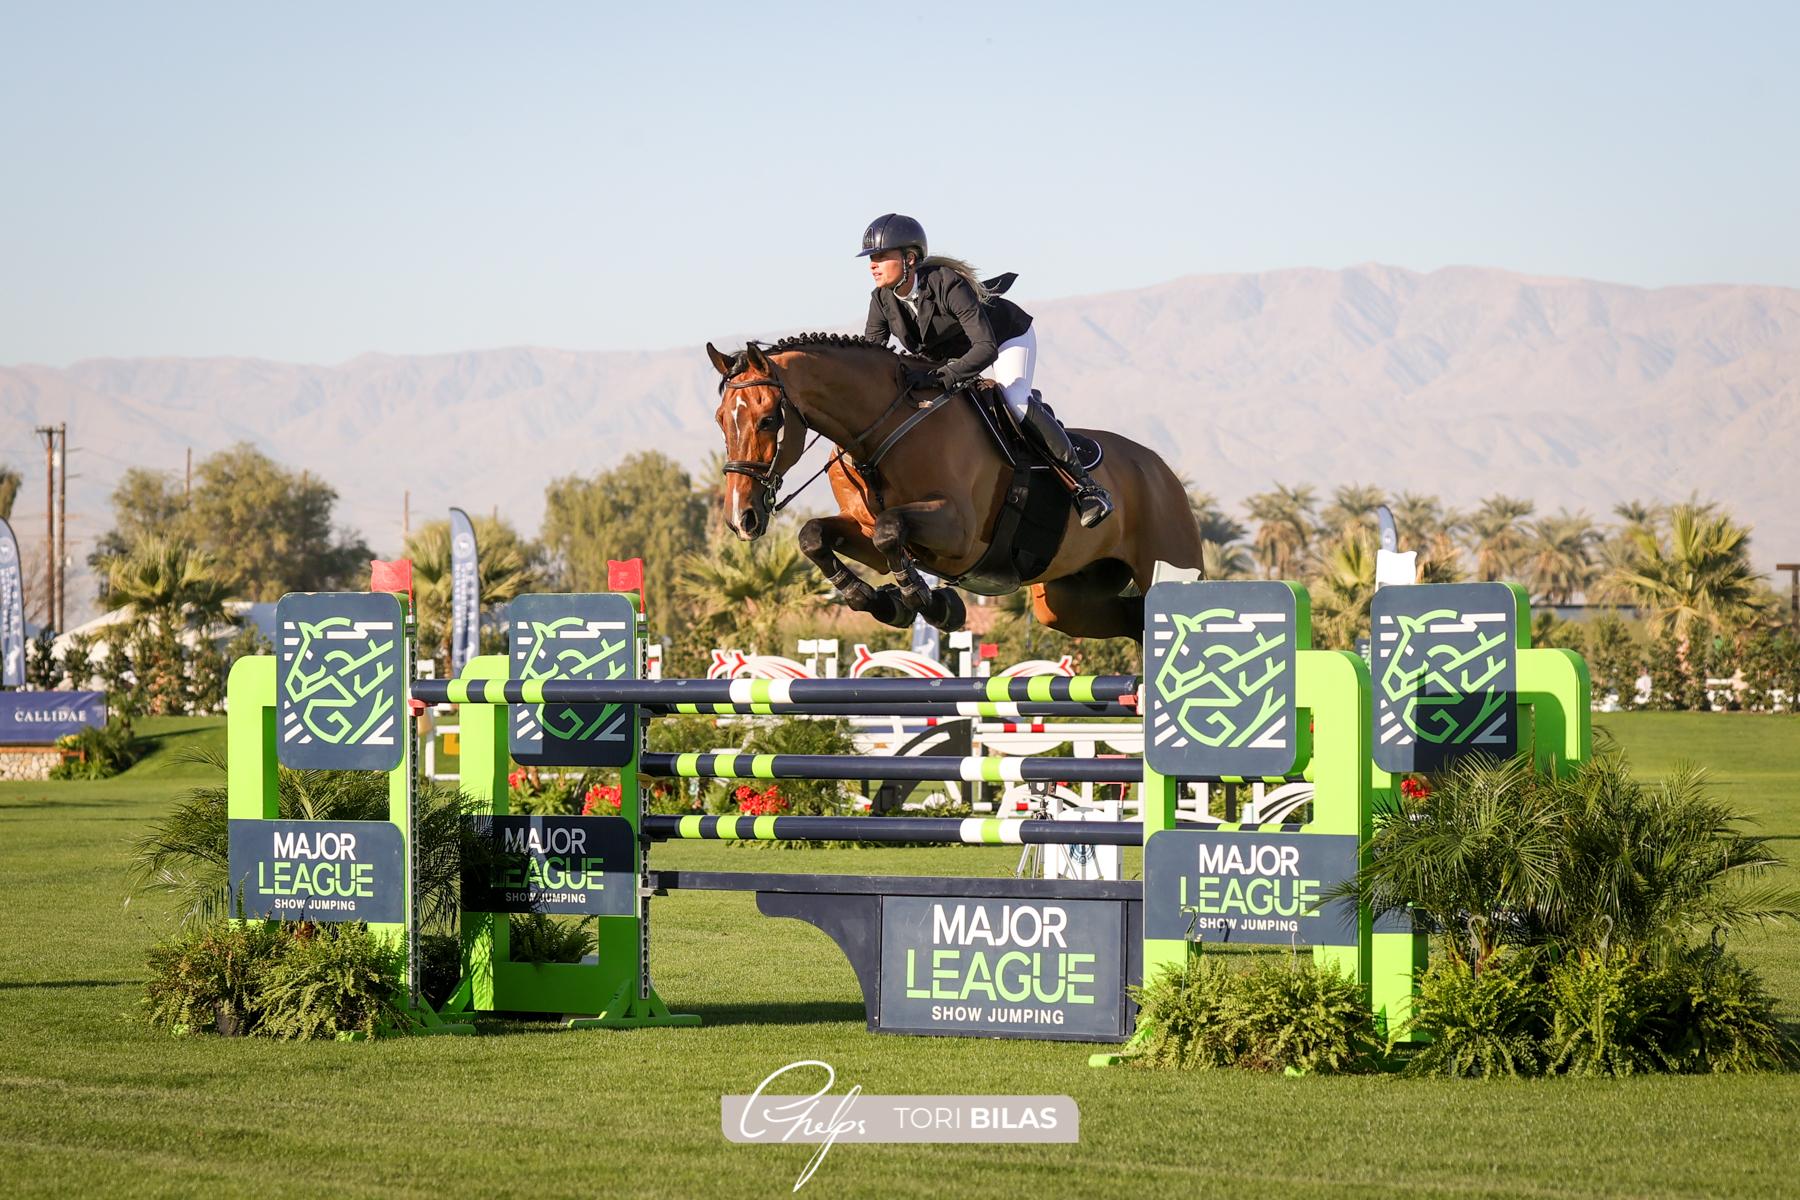 Schedule Confirmed Major League Show Jumping To Return to Desert